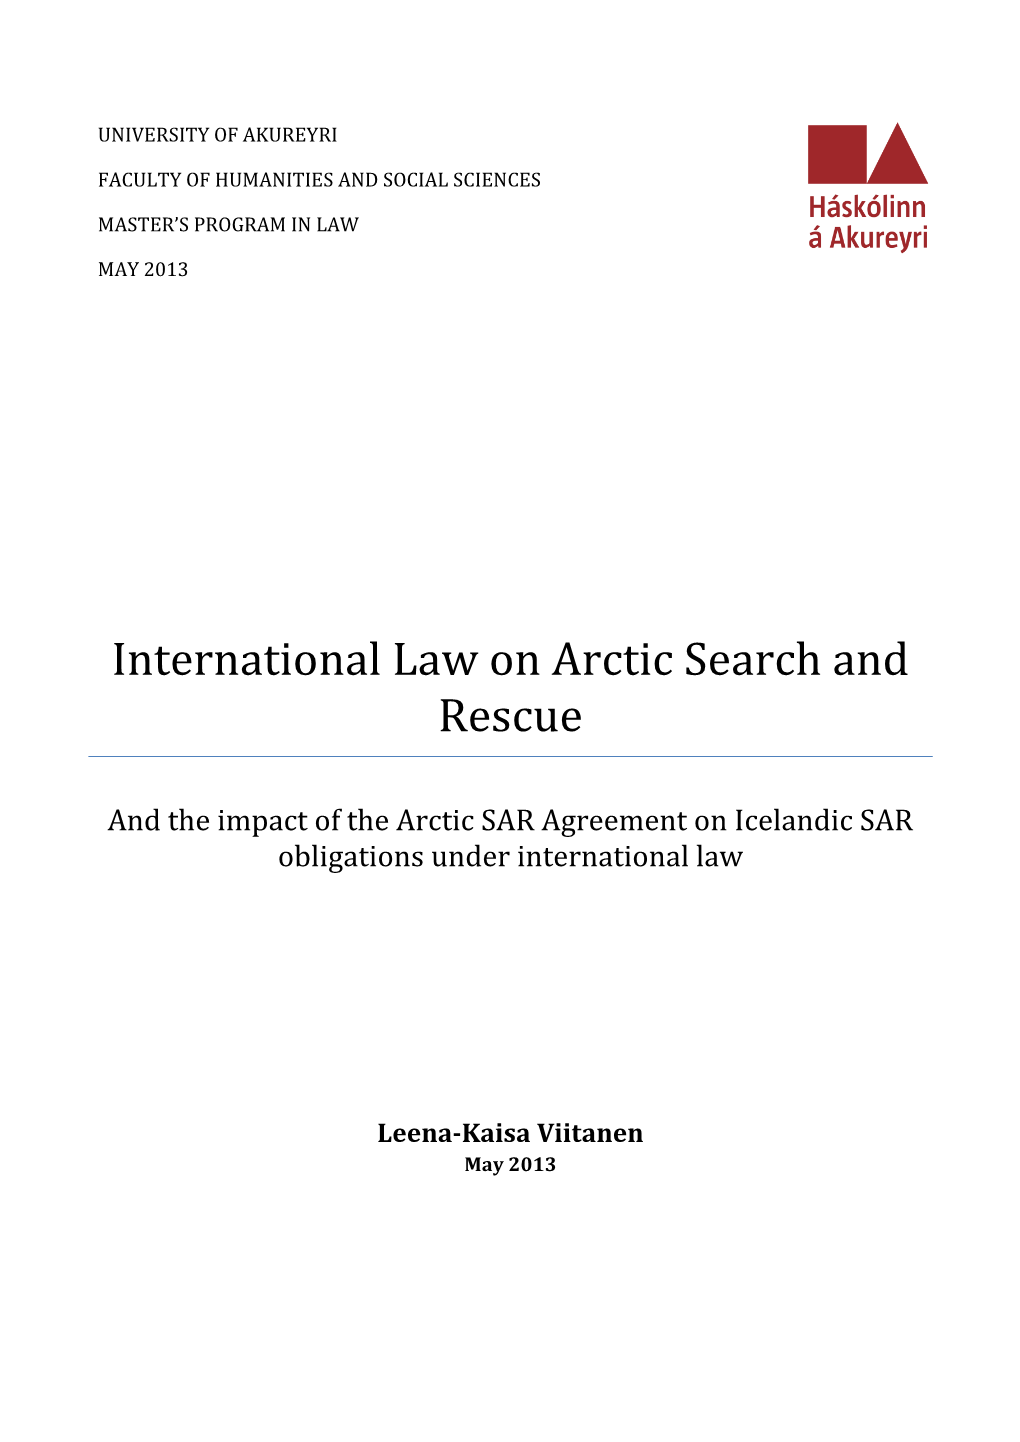 International Law on Arctic Search and Rescue